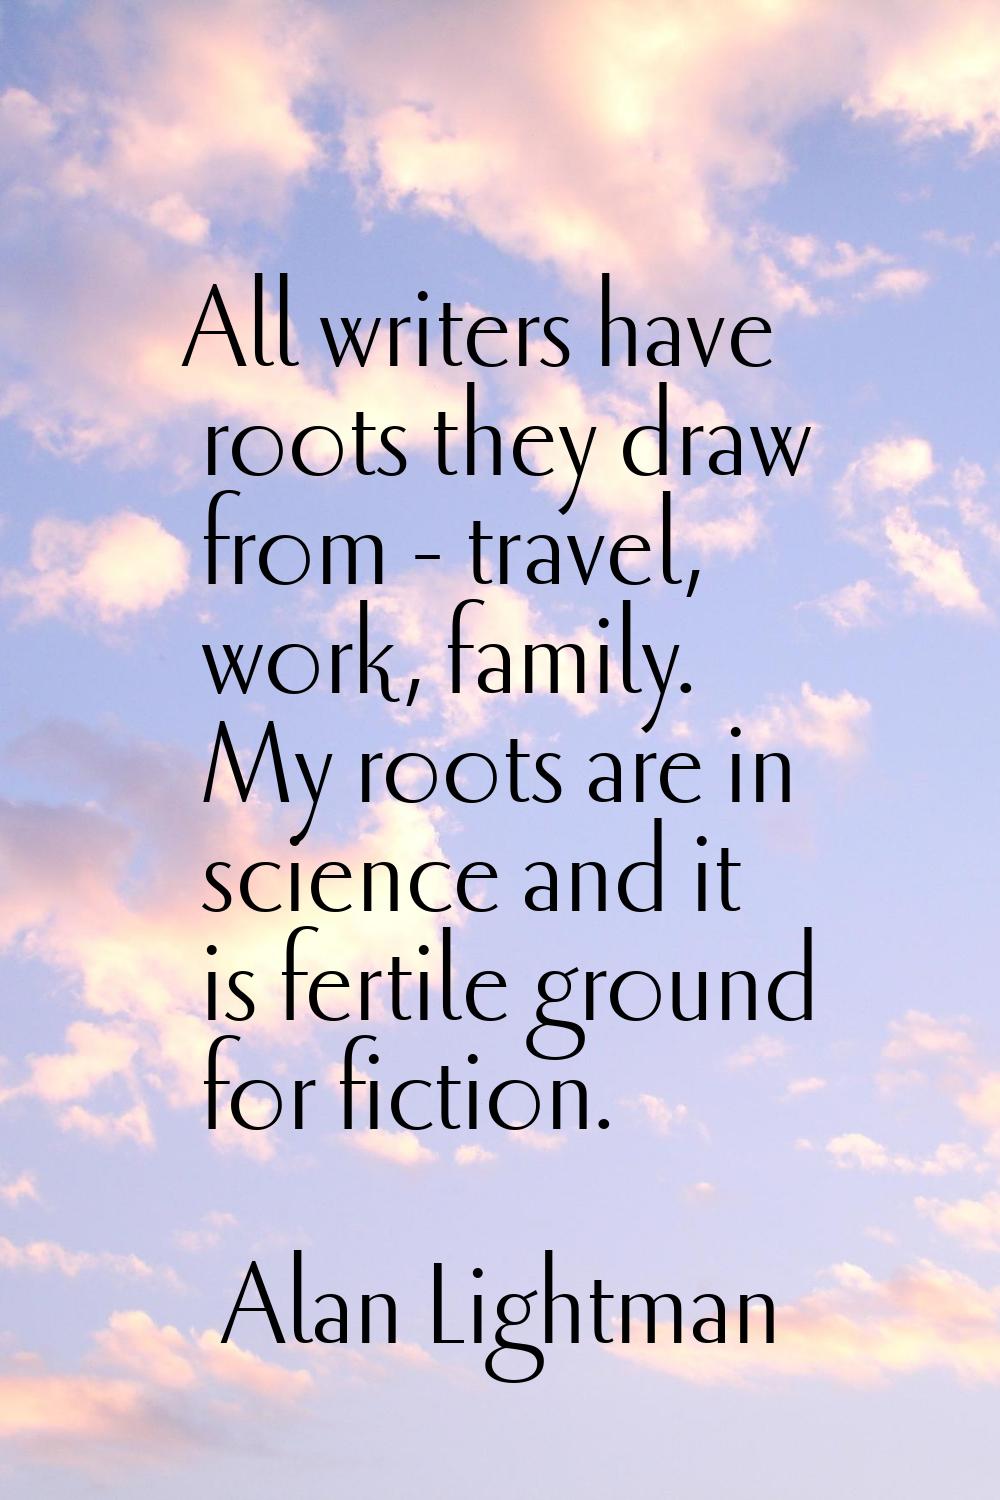 All writers have roots they draw from - travel, work, family. My roots are in science and it is fer